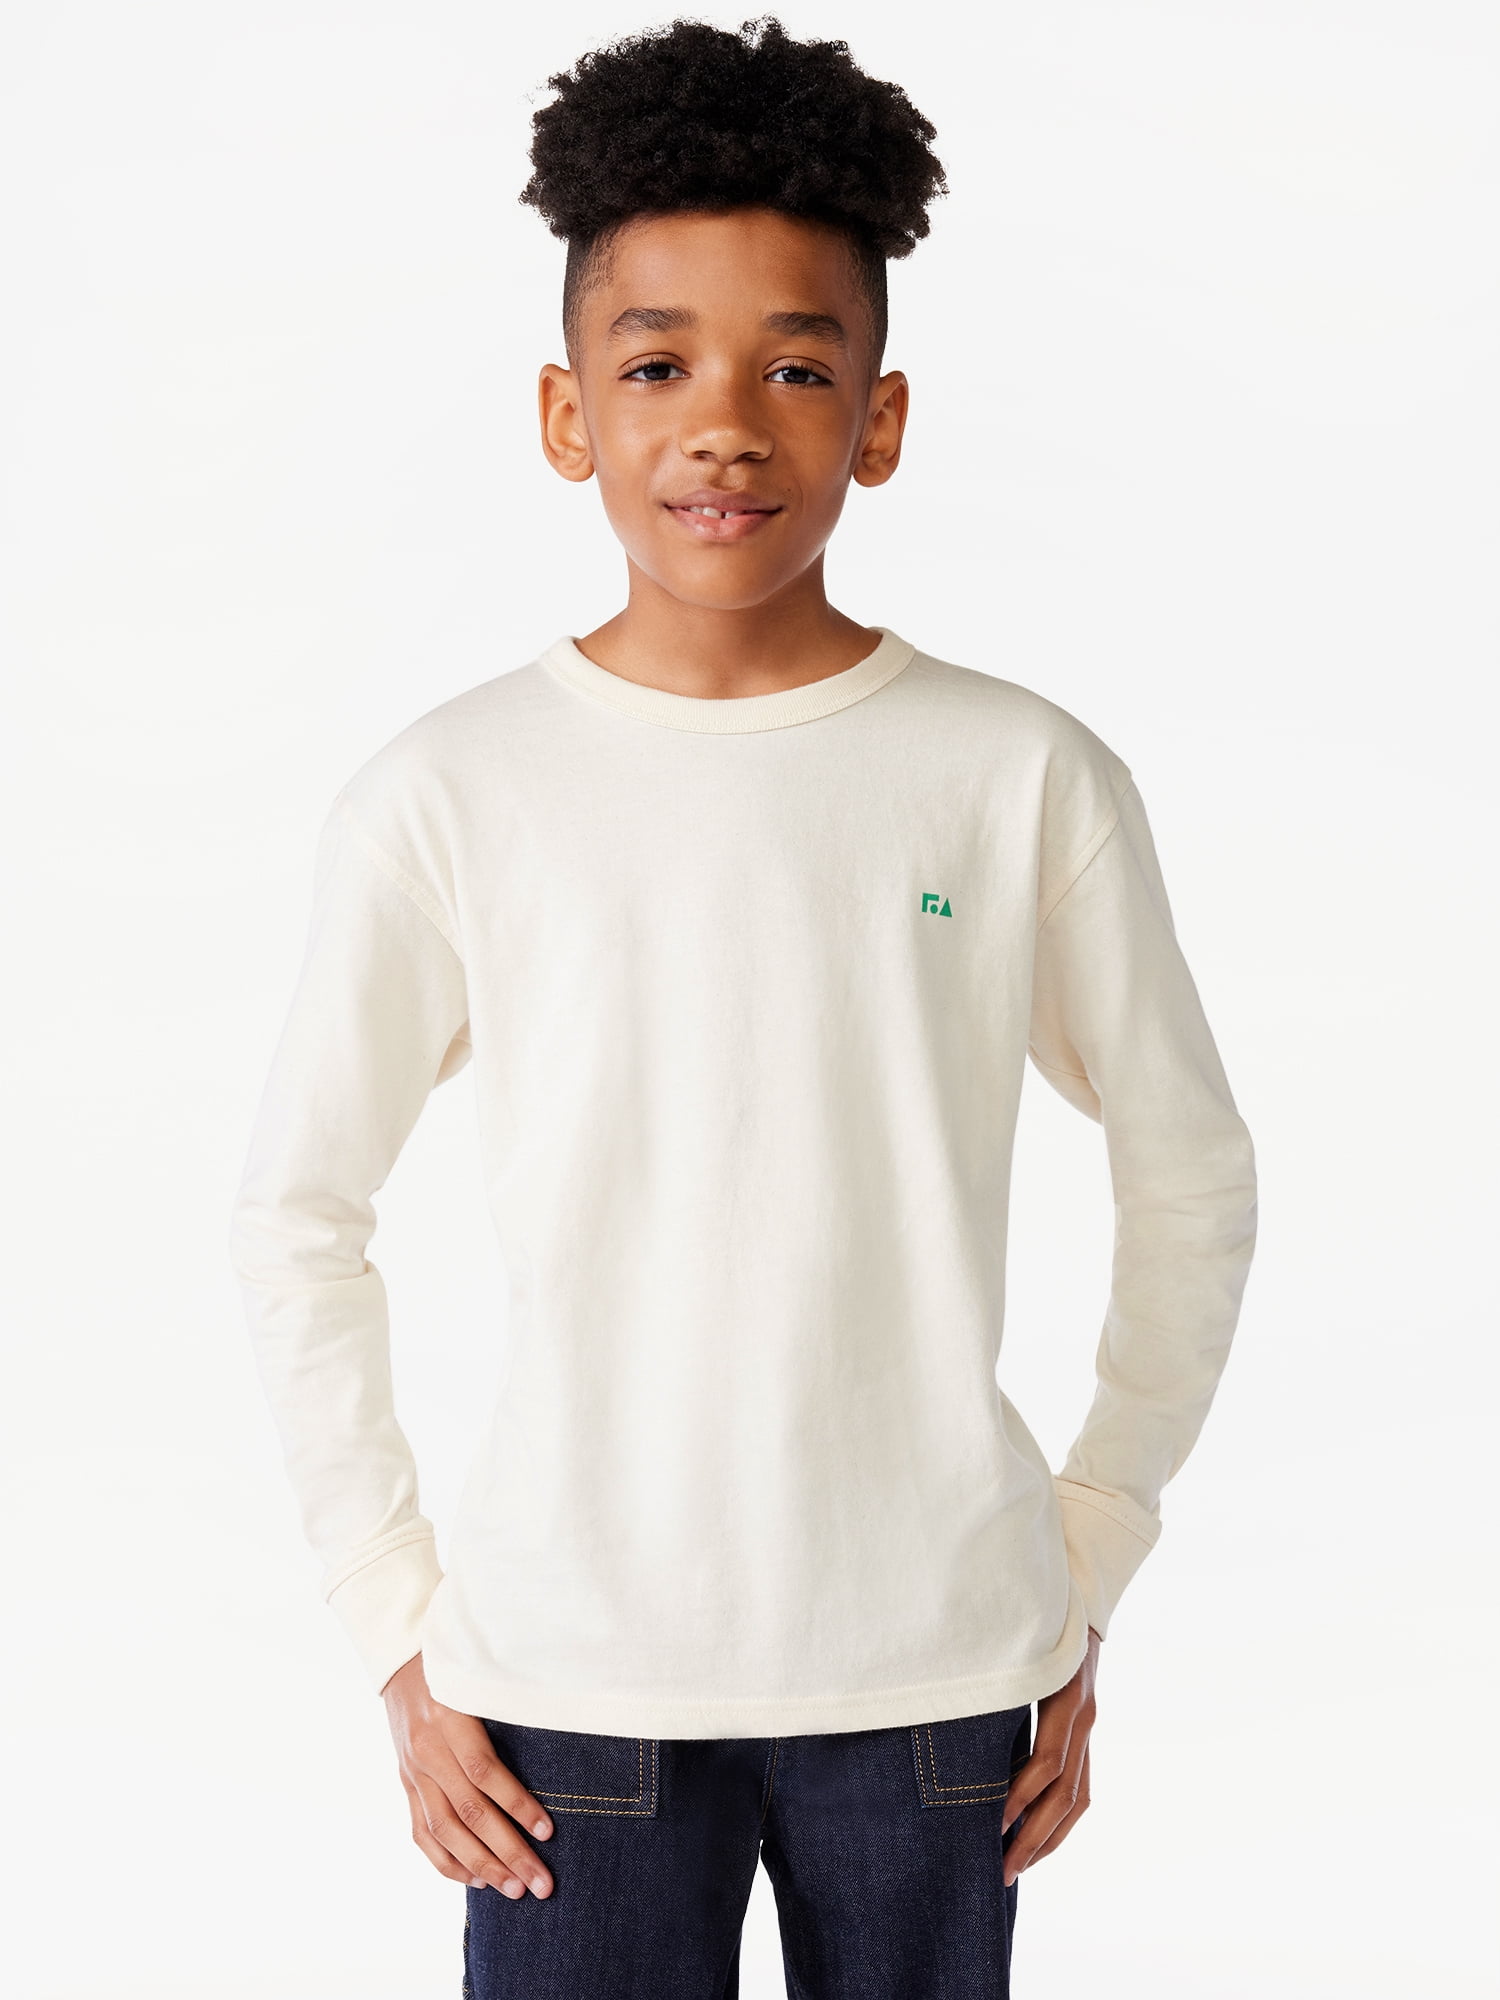 Free Assembly Boy's Long Sleeve Graphic Tee, Sizes 4-18 - Walmart.com